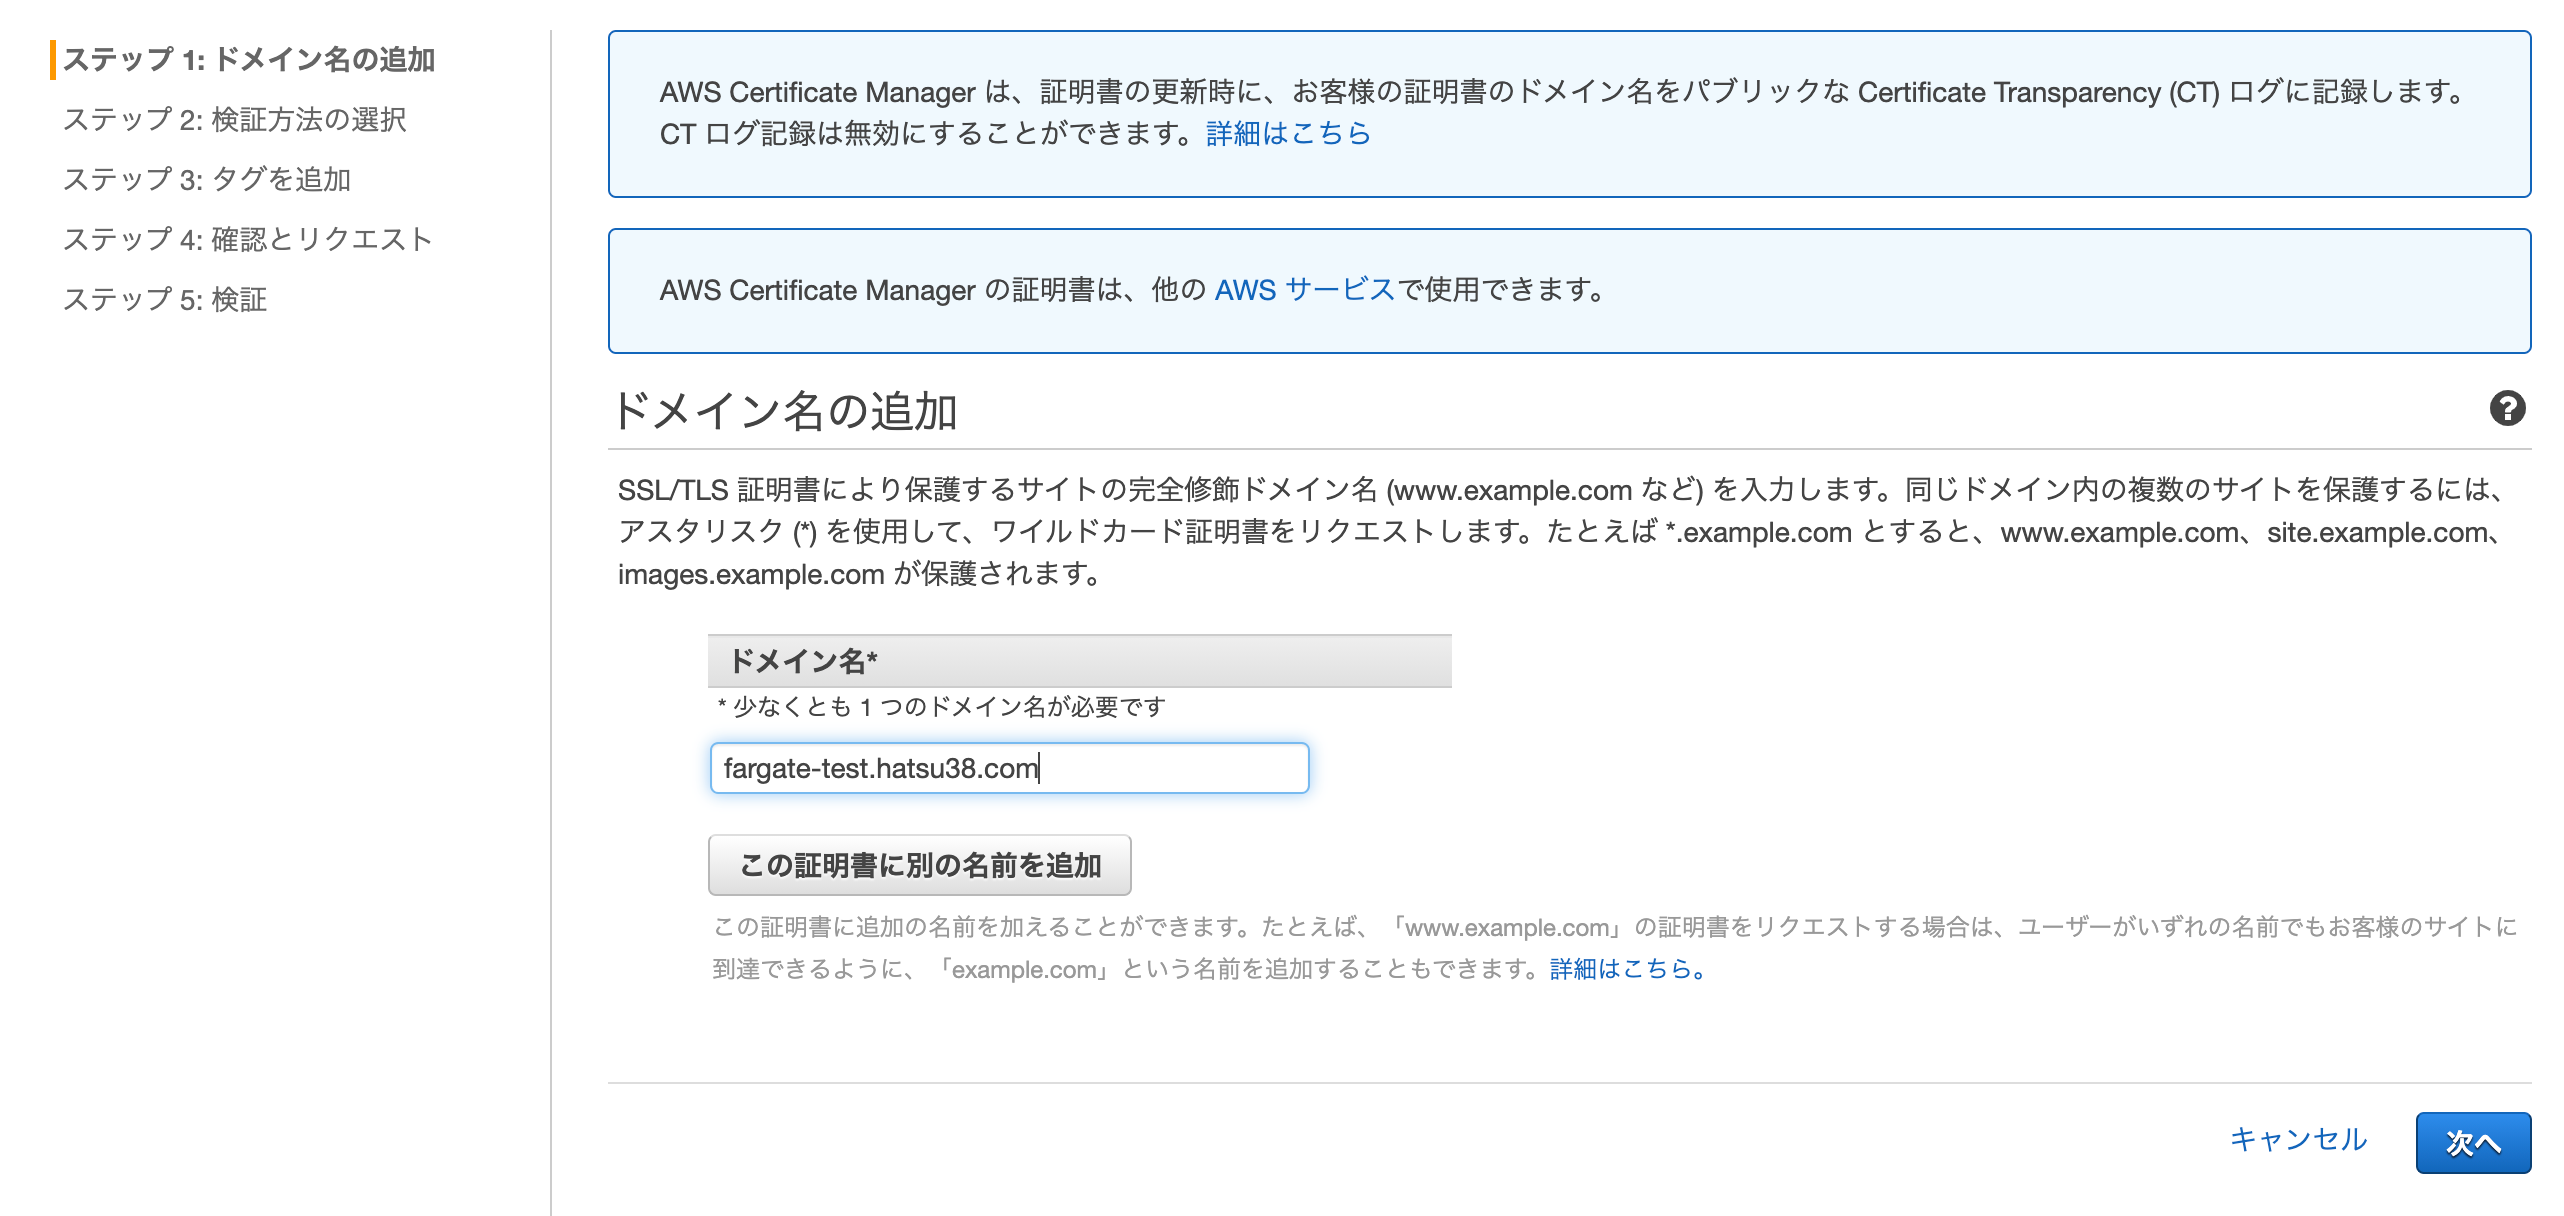 AWS_Certificate_Manager.png